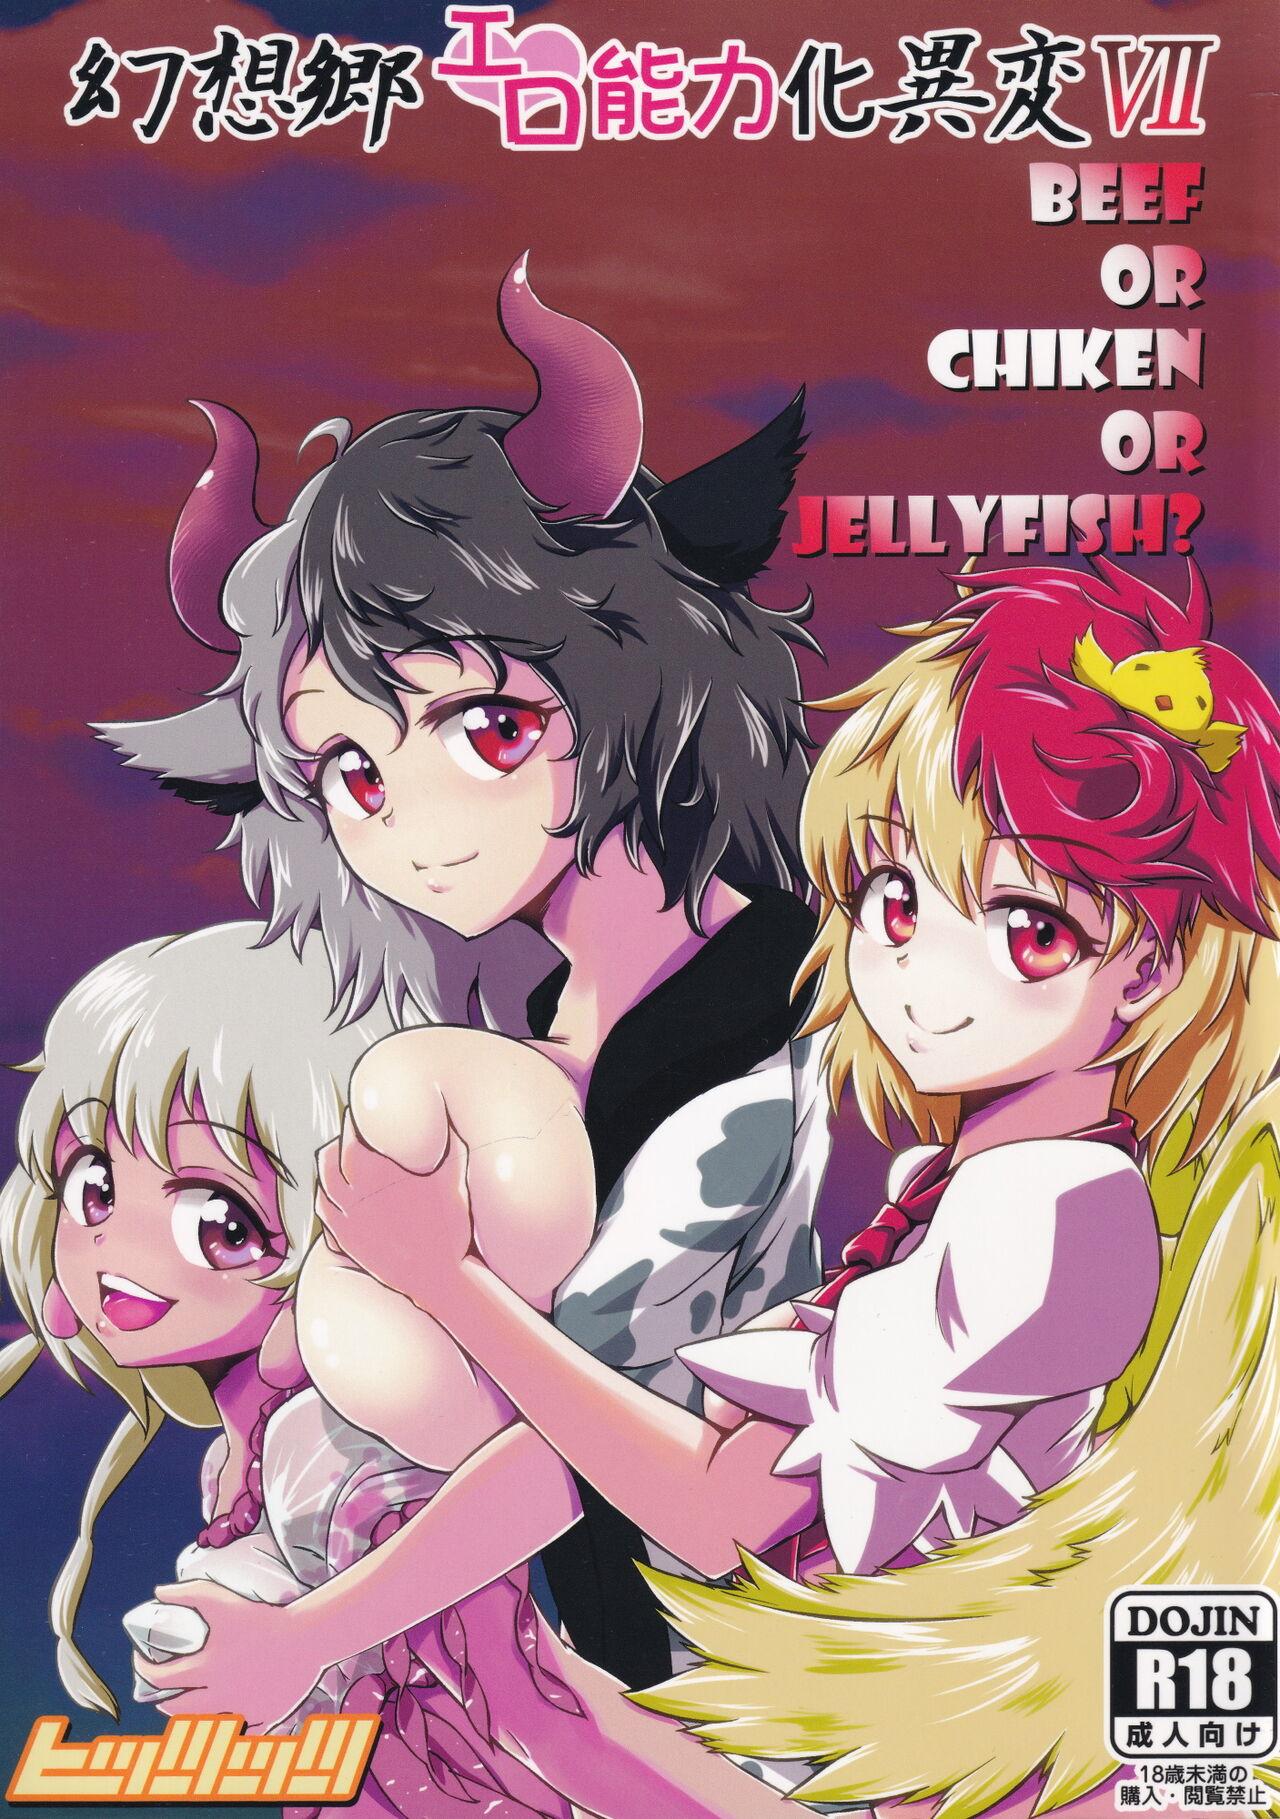 Culote Gensoukyou Ero Nouryoku-ka Ihen VII Beef or Chicken or Jellyfish? - Touhou project Eng Sub - Picture 1